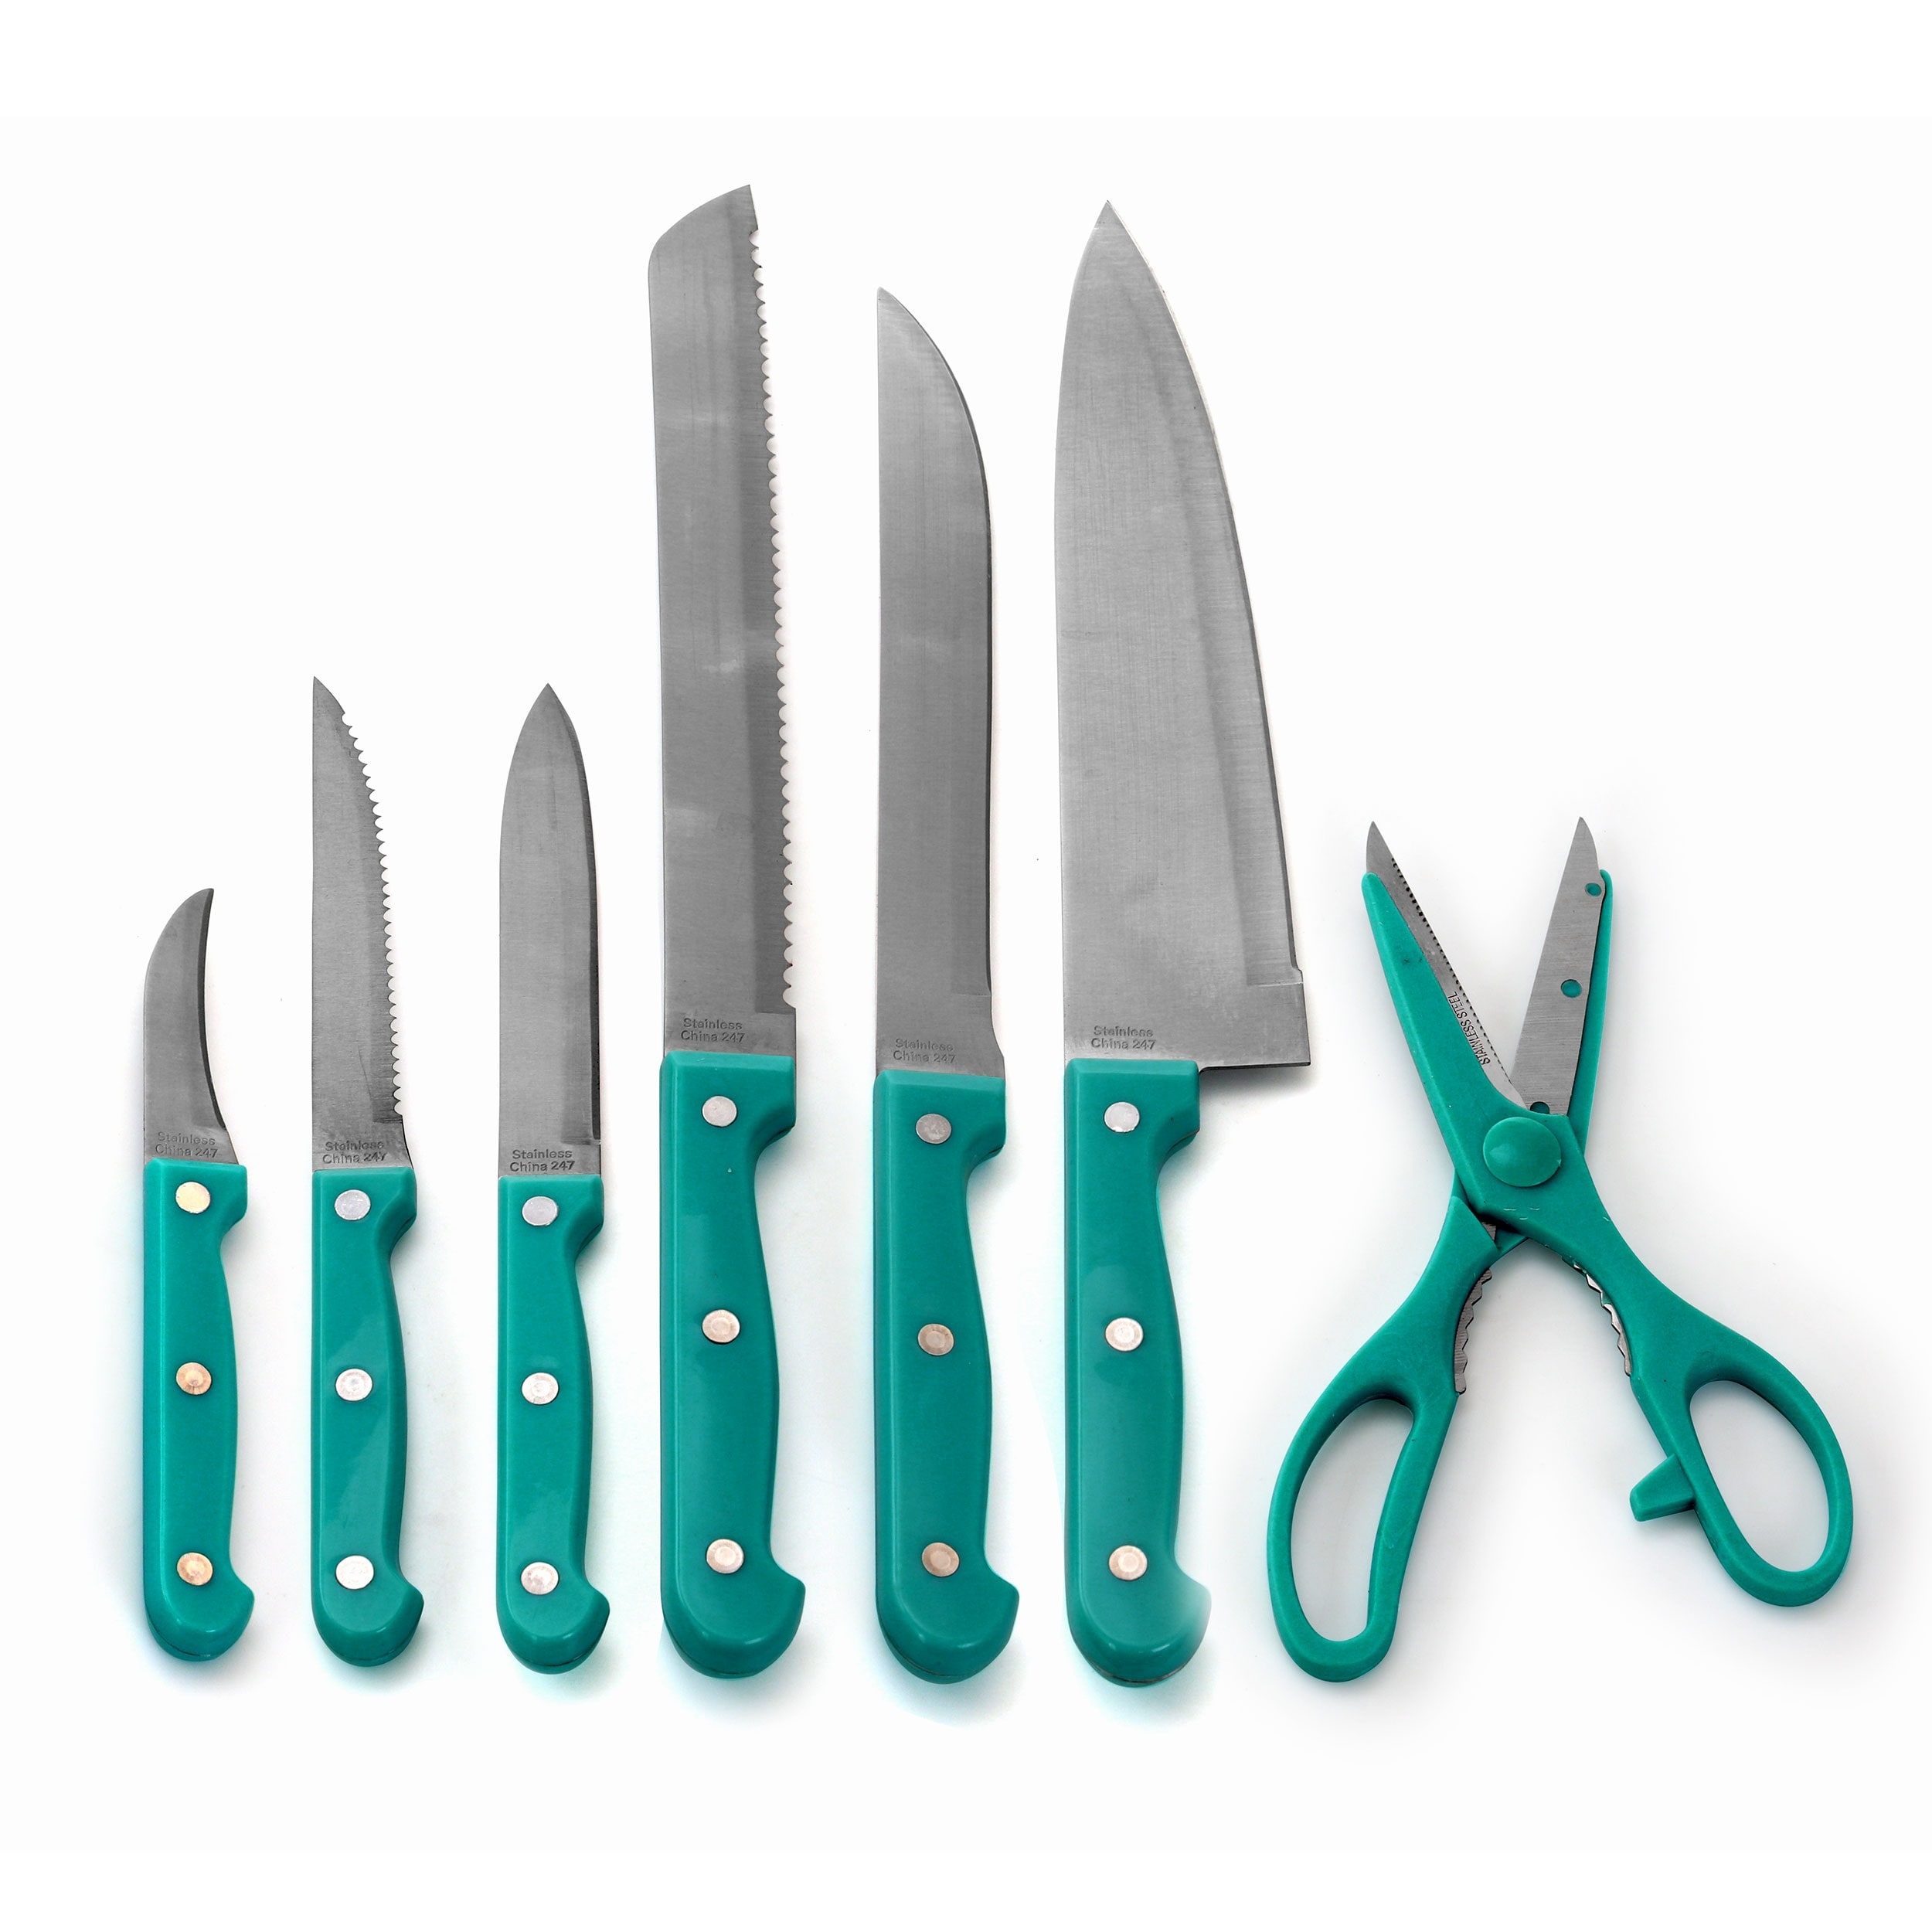 https://ak1.ostkcdn.com/images/products/is/images/direct/f7a7f94af212f583a977ad967bd98baaf34686bf/MegaChef-14-Piece-Cutlery-Set-in-Teal.jpg